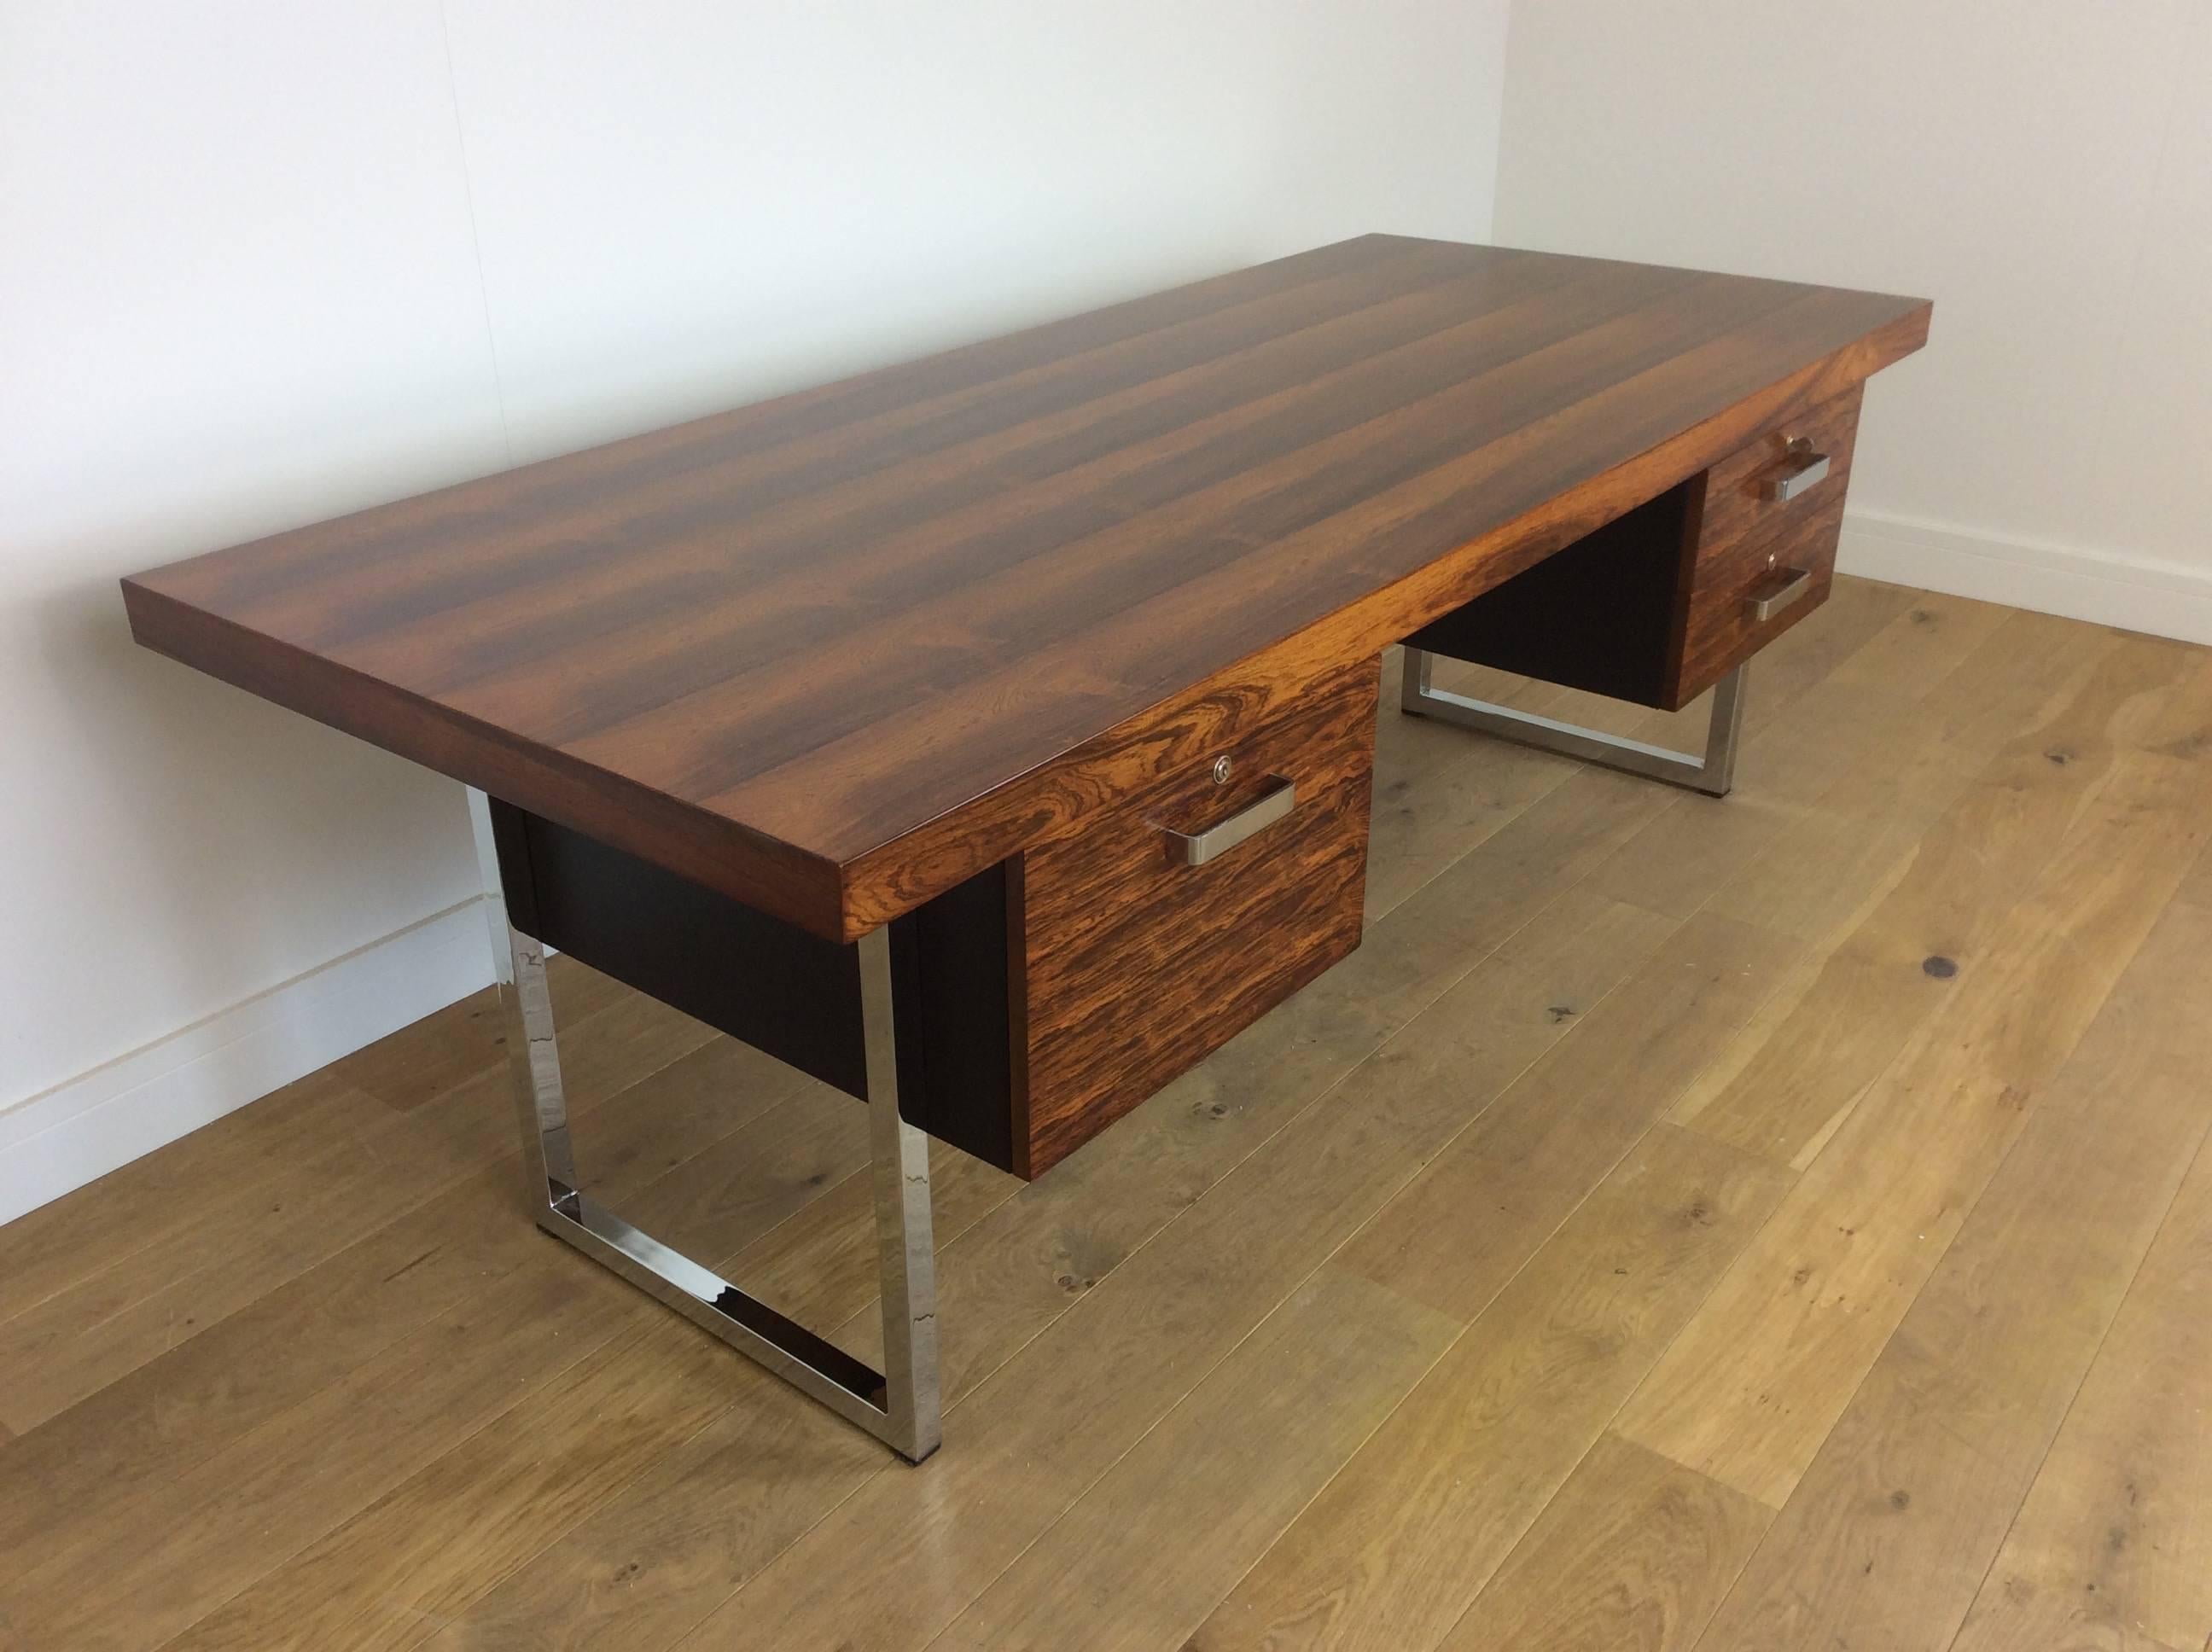 Midcentury desk
Awesome mid-century modern design desk in rosewood and chrome by Gordon Russell.
Absolutely stunning midcentury desk, beautiful Brazilian rosewood raised on square frame chrome supports, the body wrapped in black